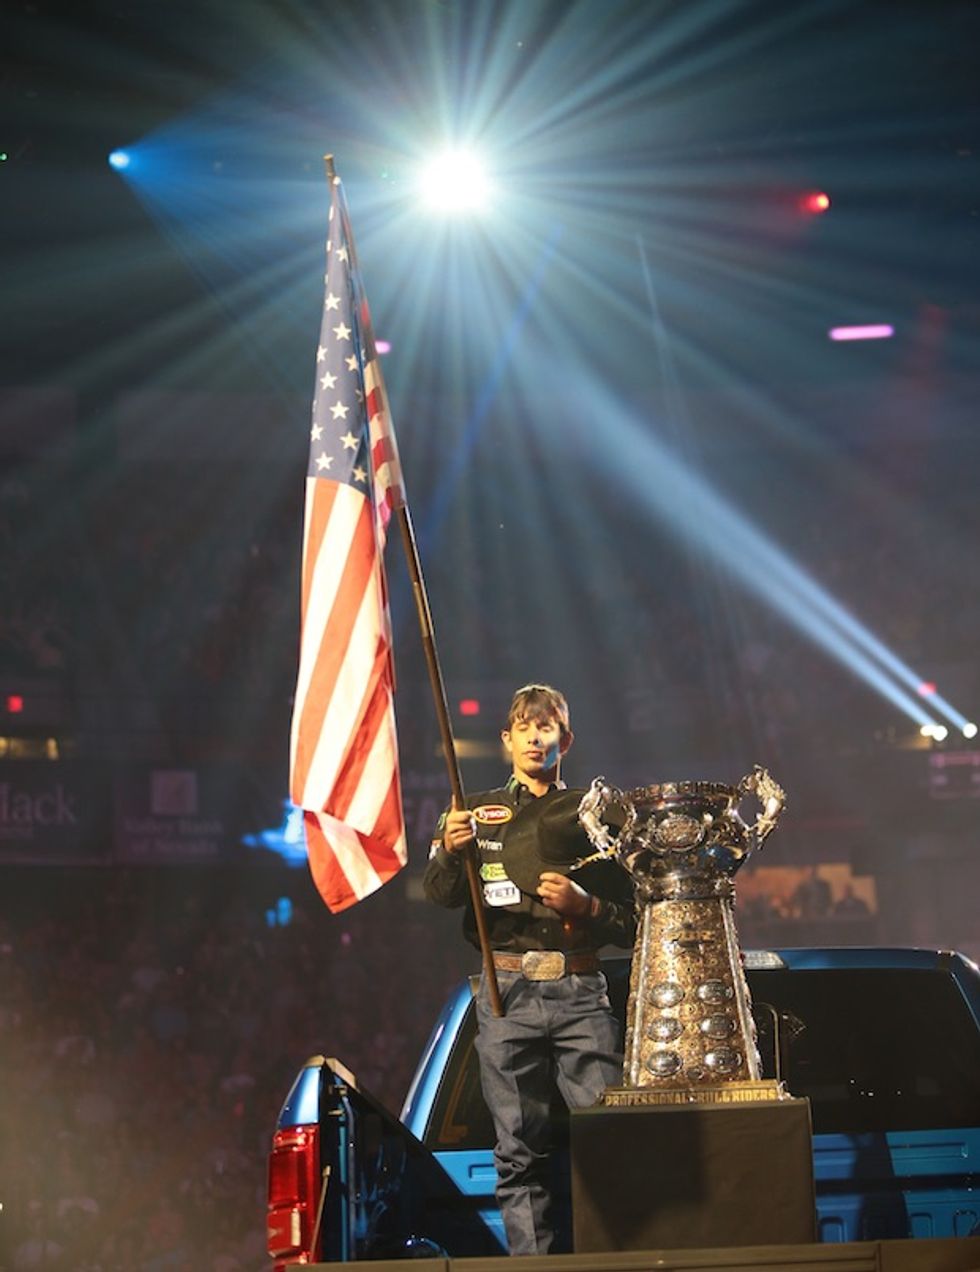 WE STAND UNITED': Professional Bull Riders pledge to honor national anthem at all events 